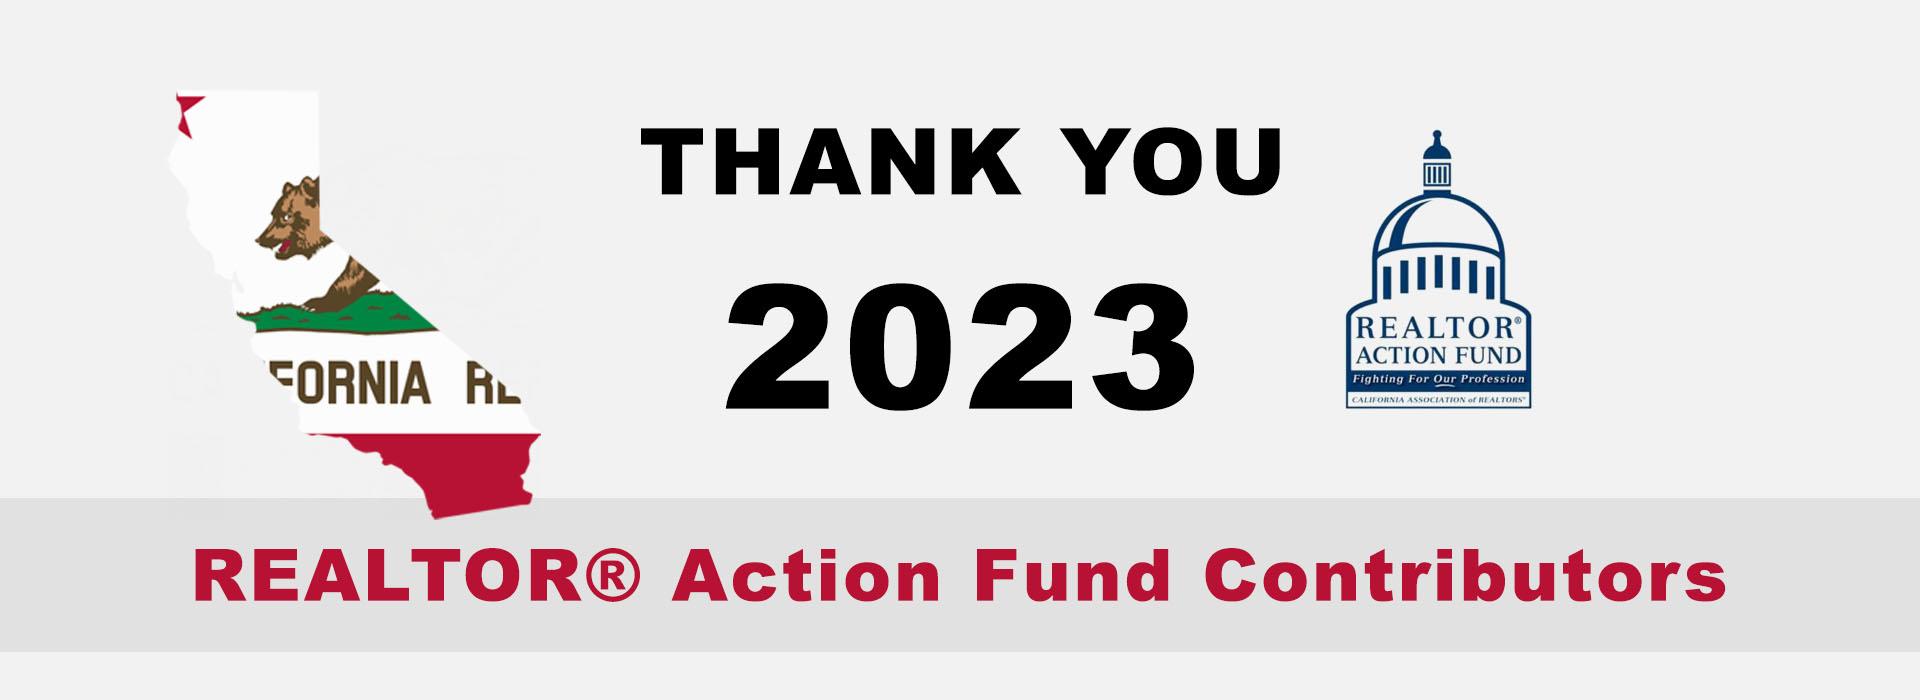 Thank_You_RAF_Contributers_2021 copy